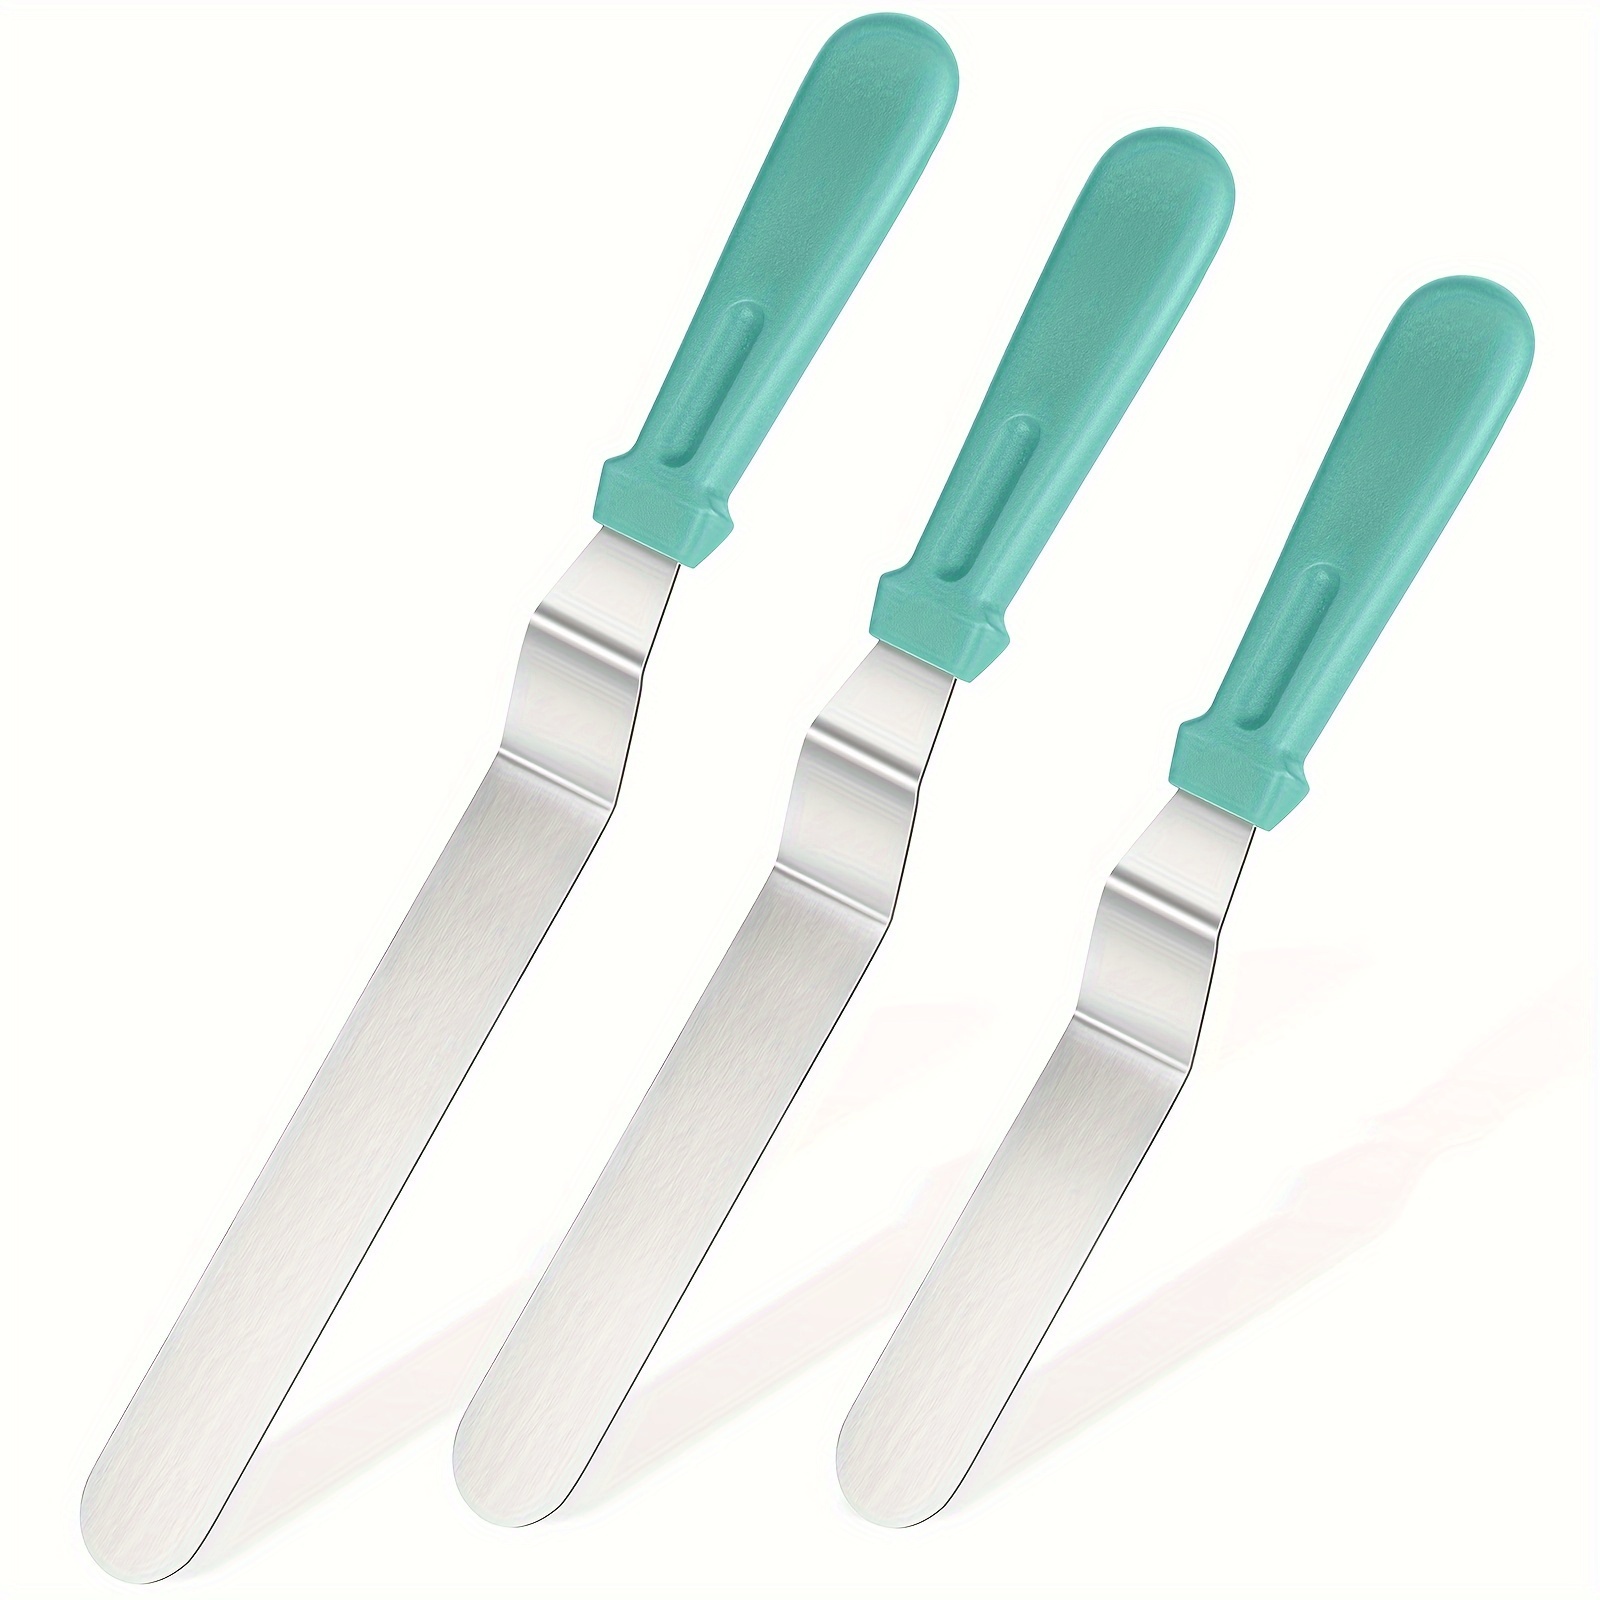 

3pcs, Stainless Steel Icing Spatula Set, Offset Spatula Set With 6", 8", 10" Blade, With Pp Plastic Handle Angled Cake Decorating Frosting Scraper, Baking Tools